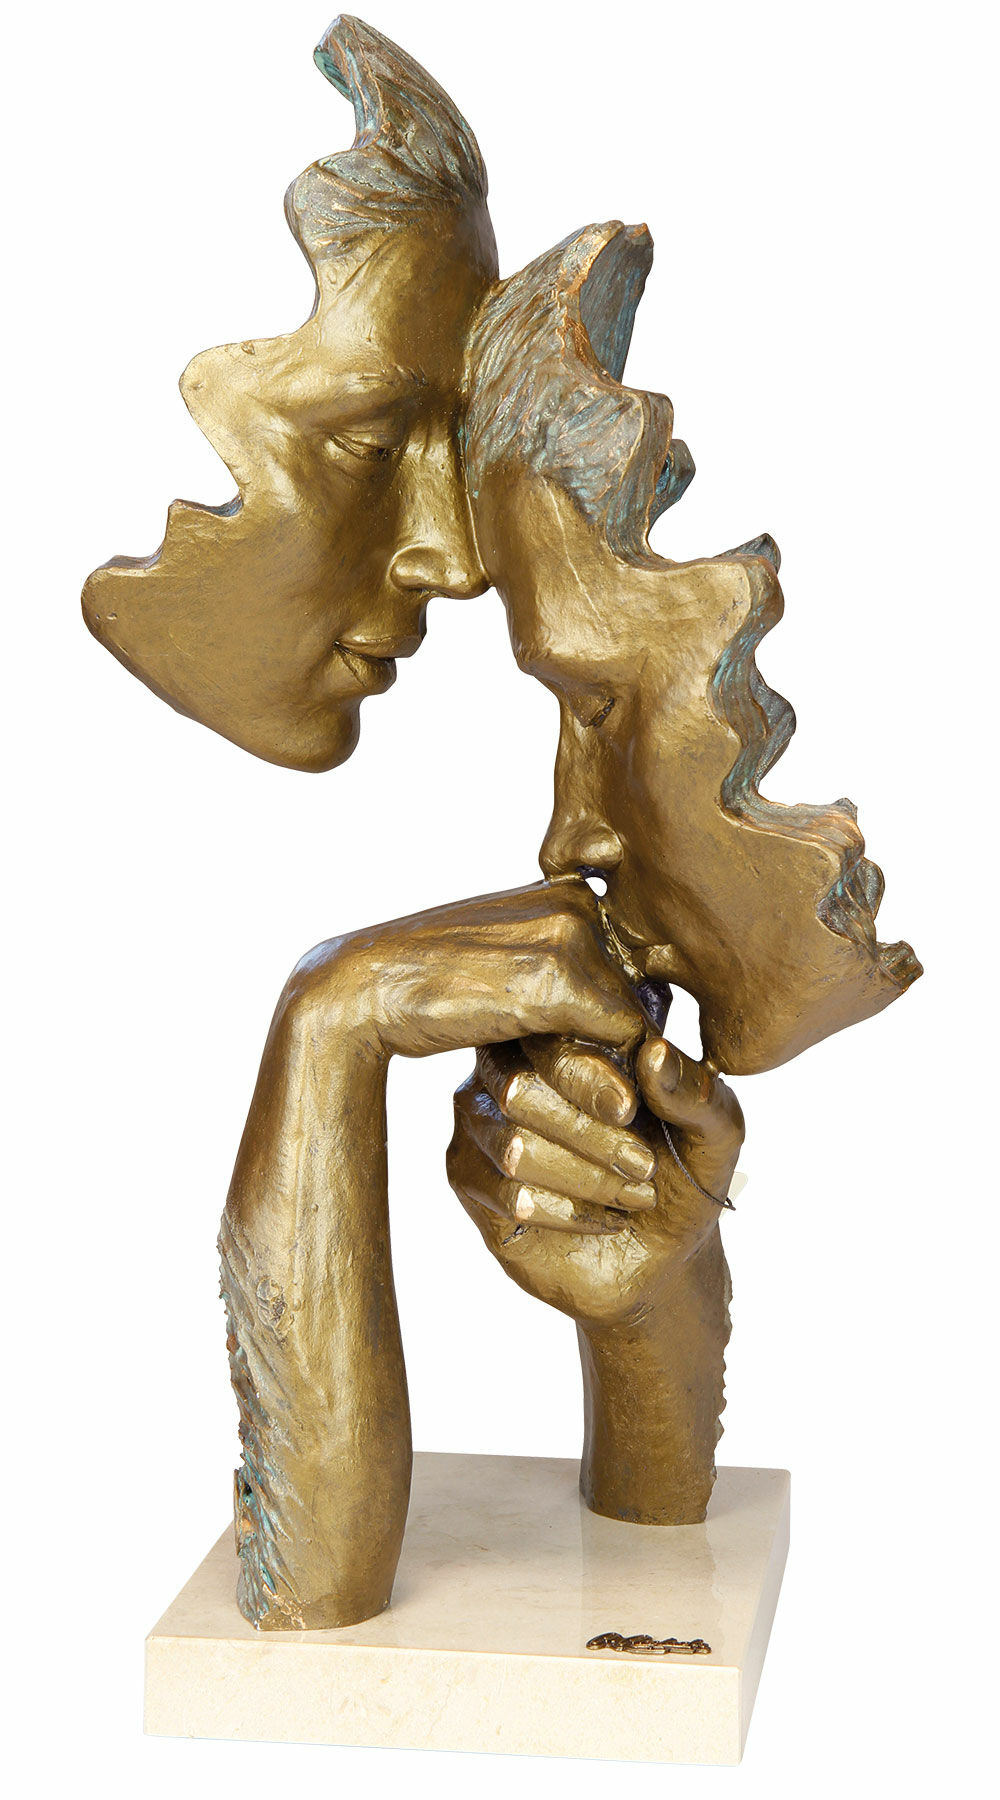 Sculpture "Familiarity", artificial stone by Angeles Anglada